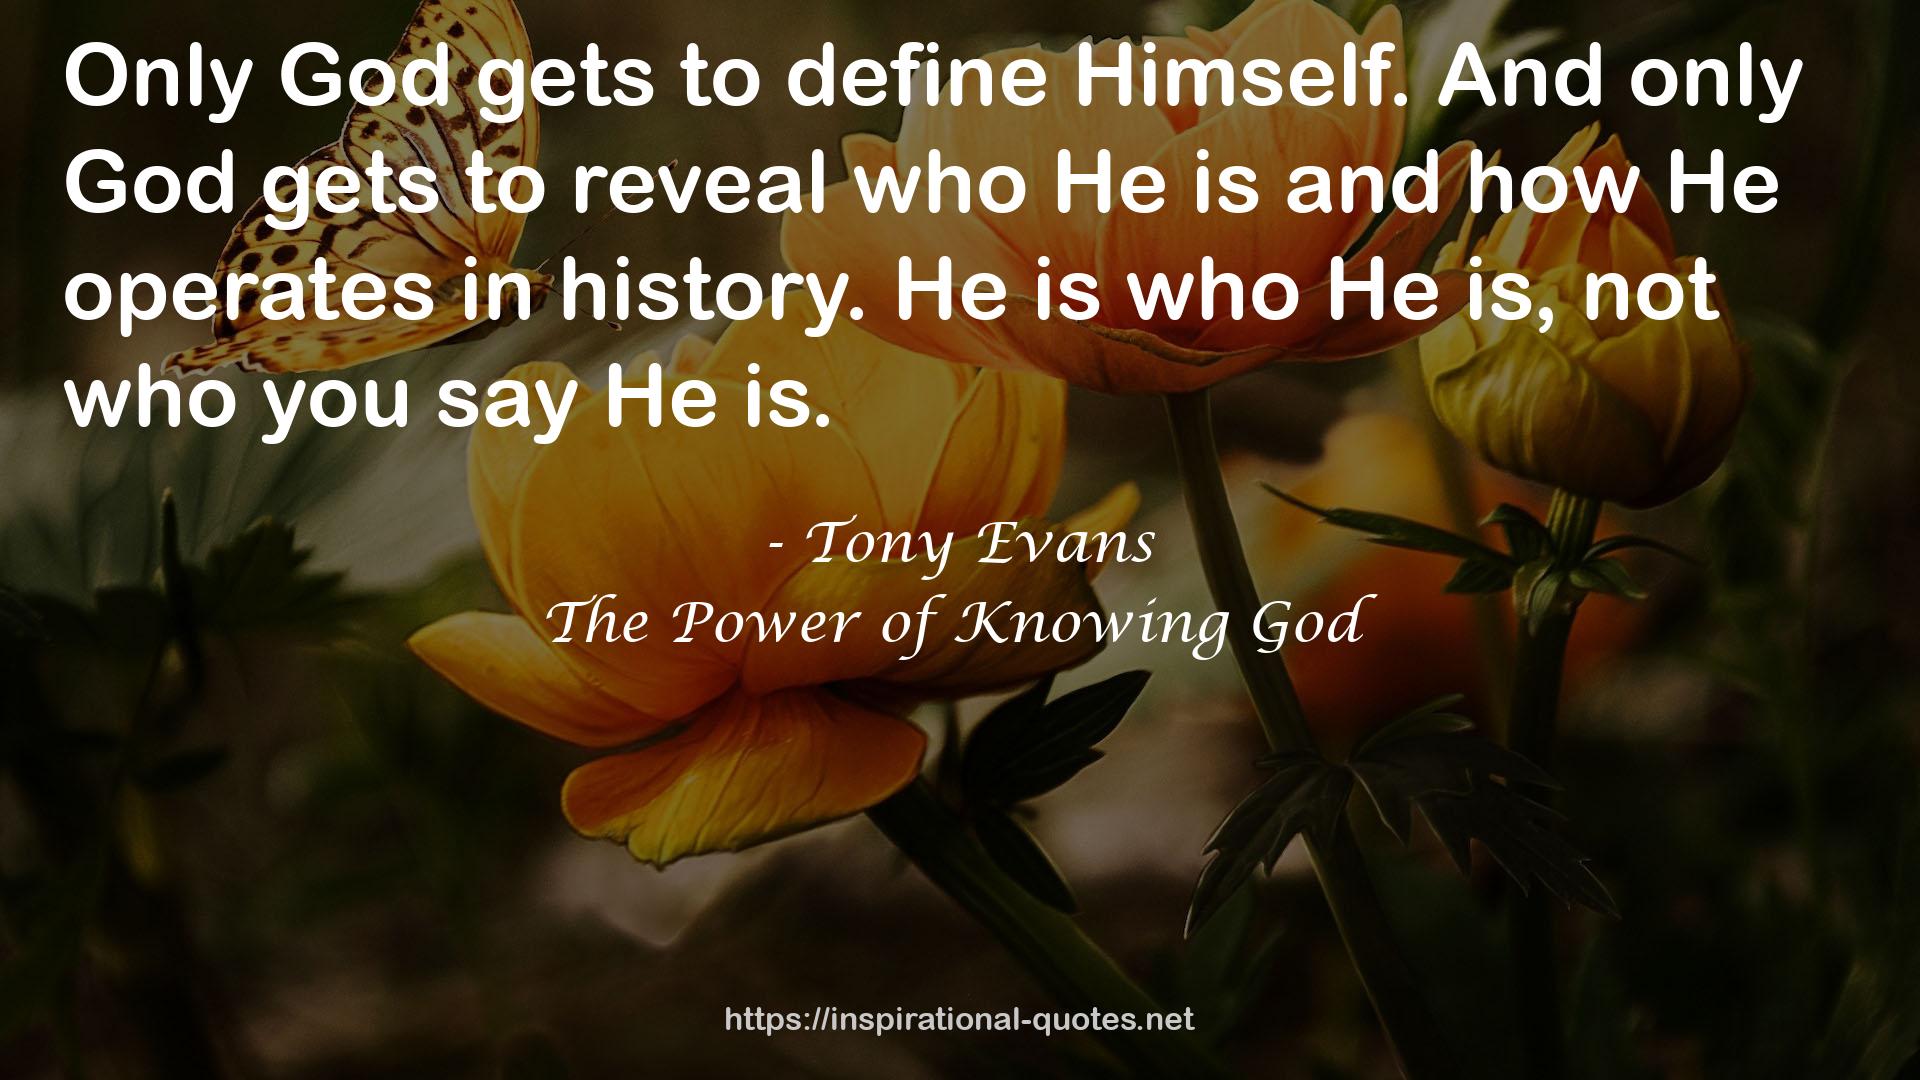 The Power of Knowing God QUOTES